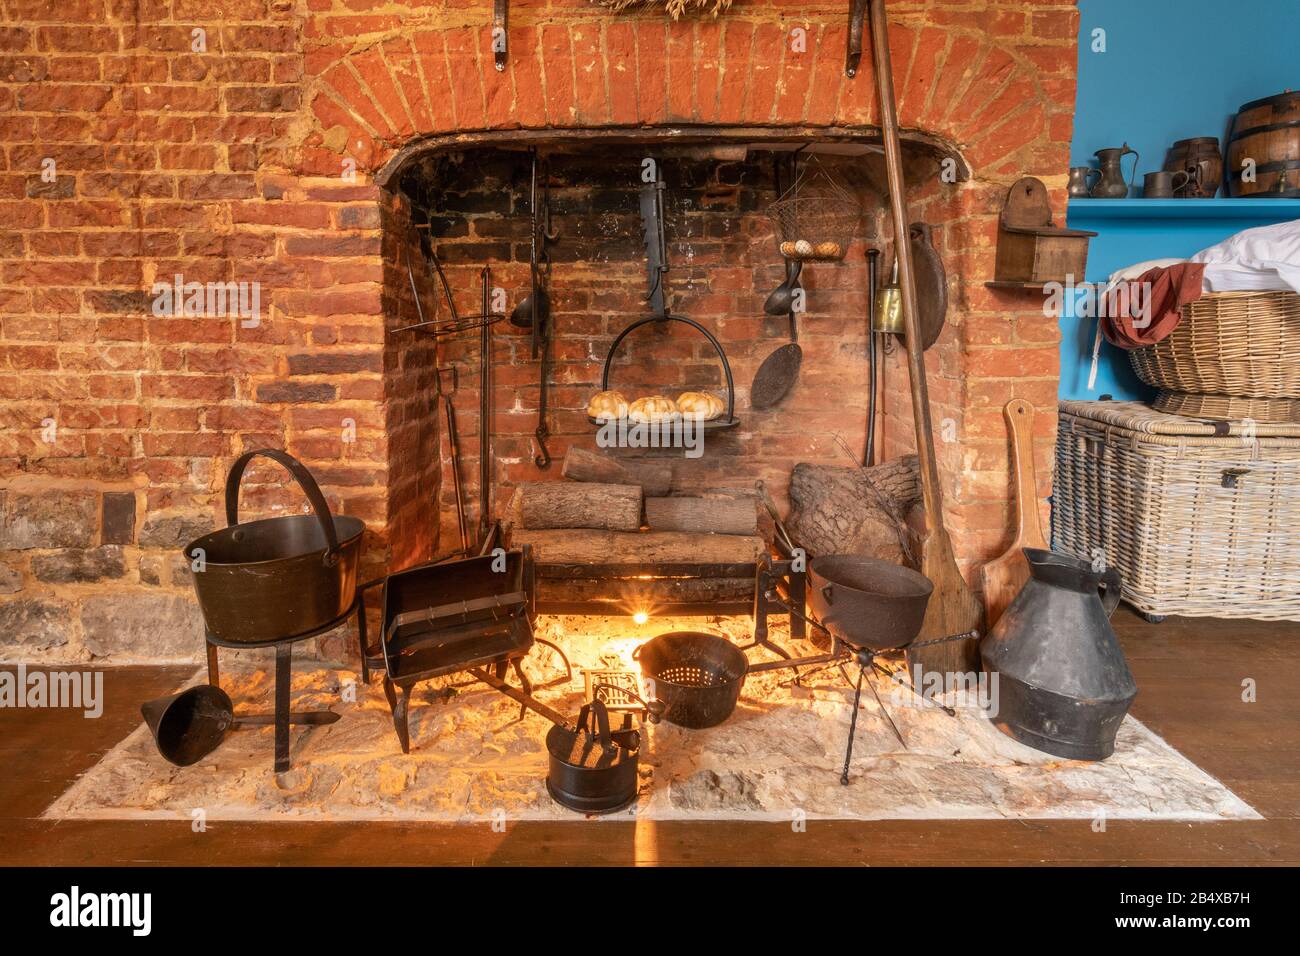 The Gilbert White House, a museum about the 18th century English naturalist's life and work, in Selborne, Hampshire, UK. Interior of the kitchen. Stock Photo